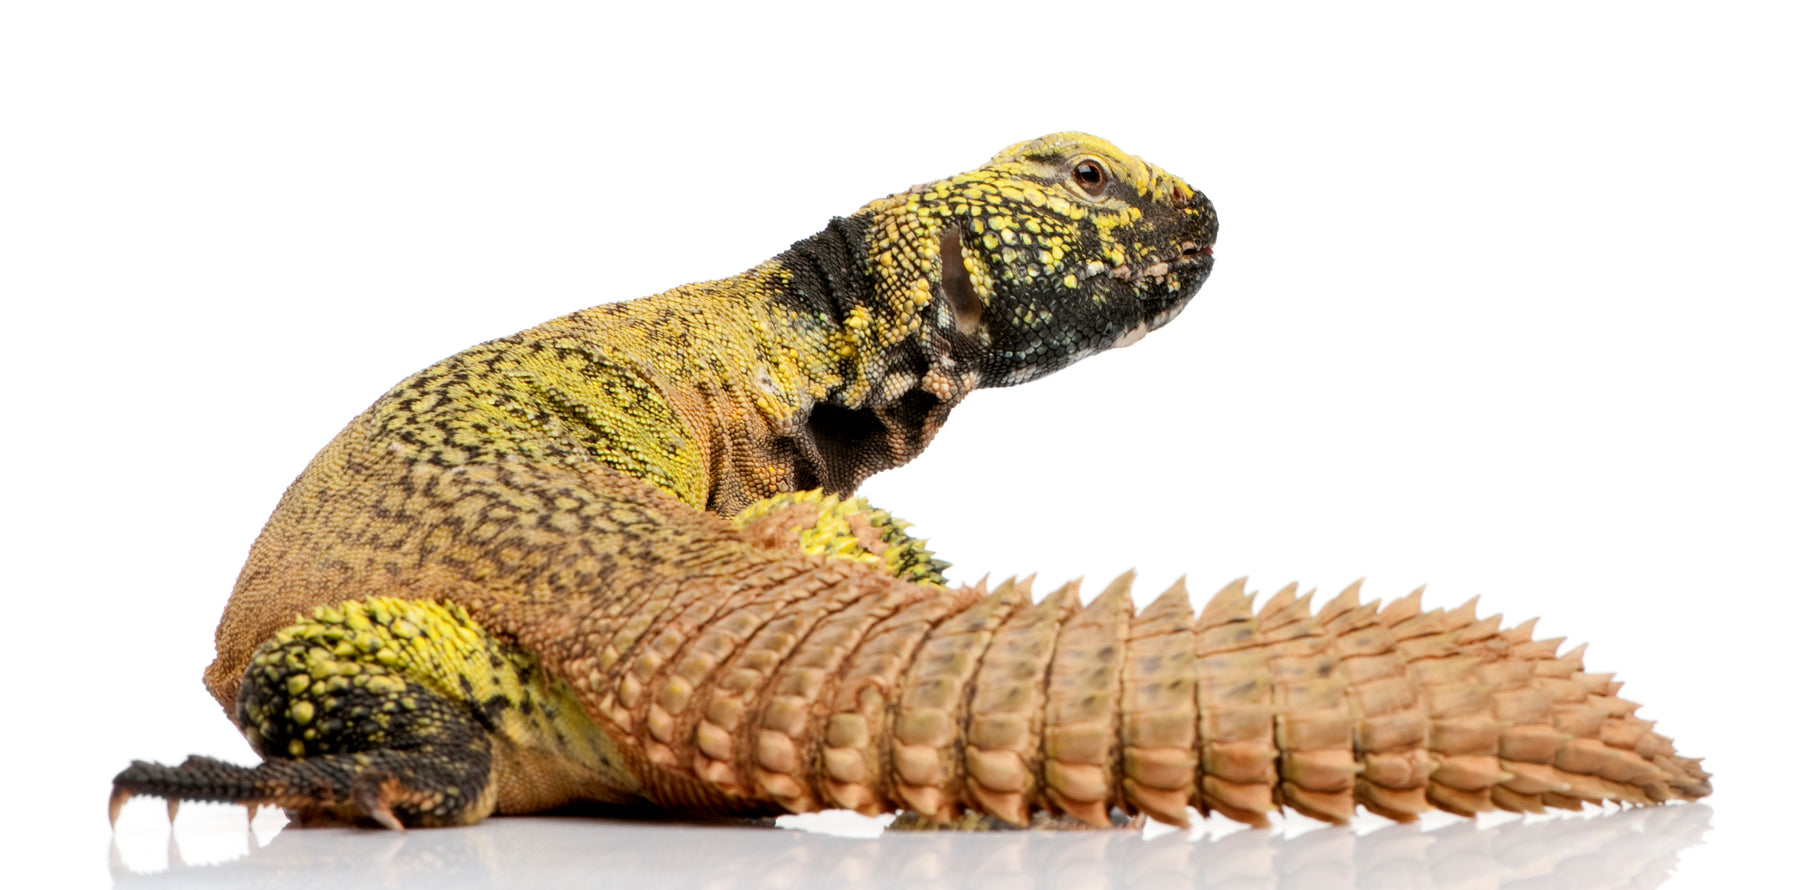 How to Care for Your Uromastyx